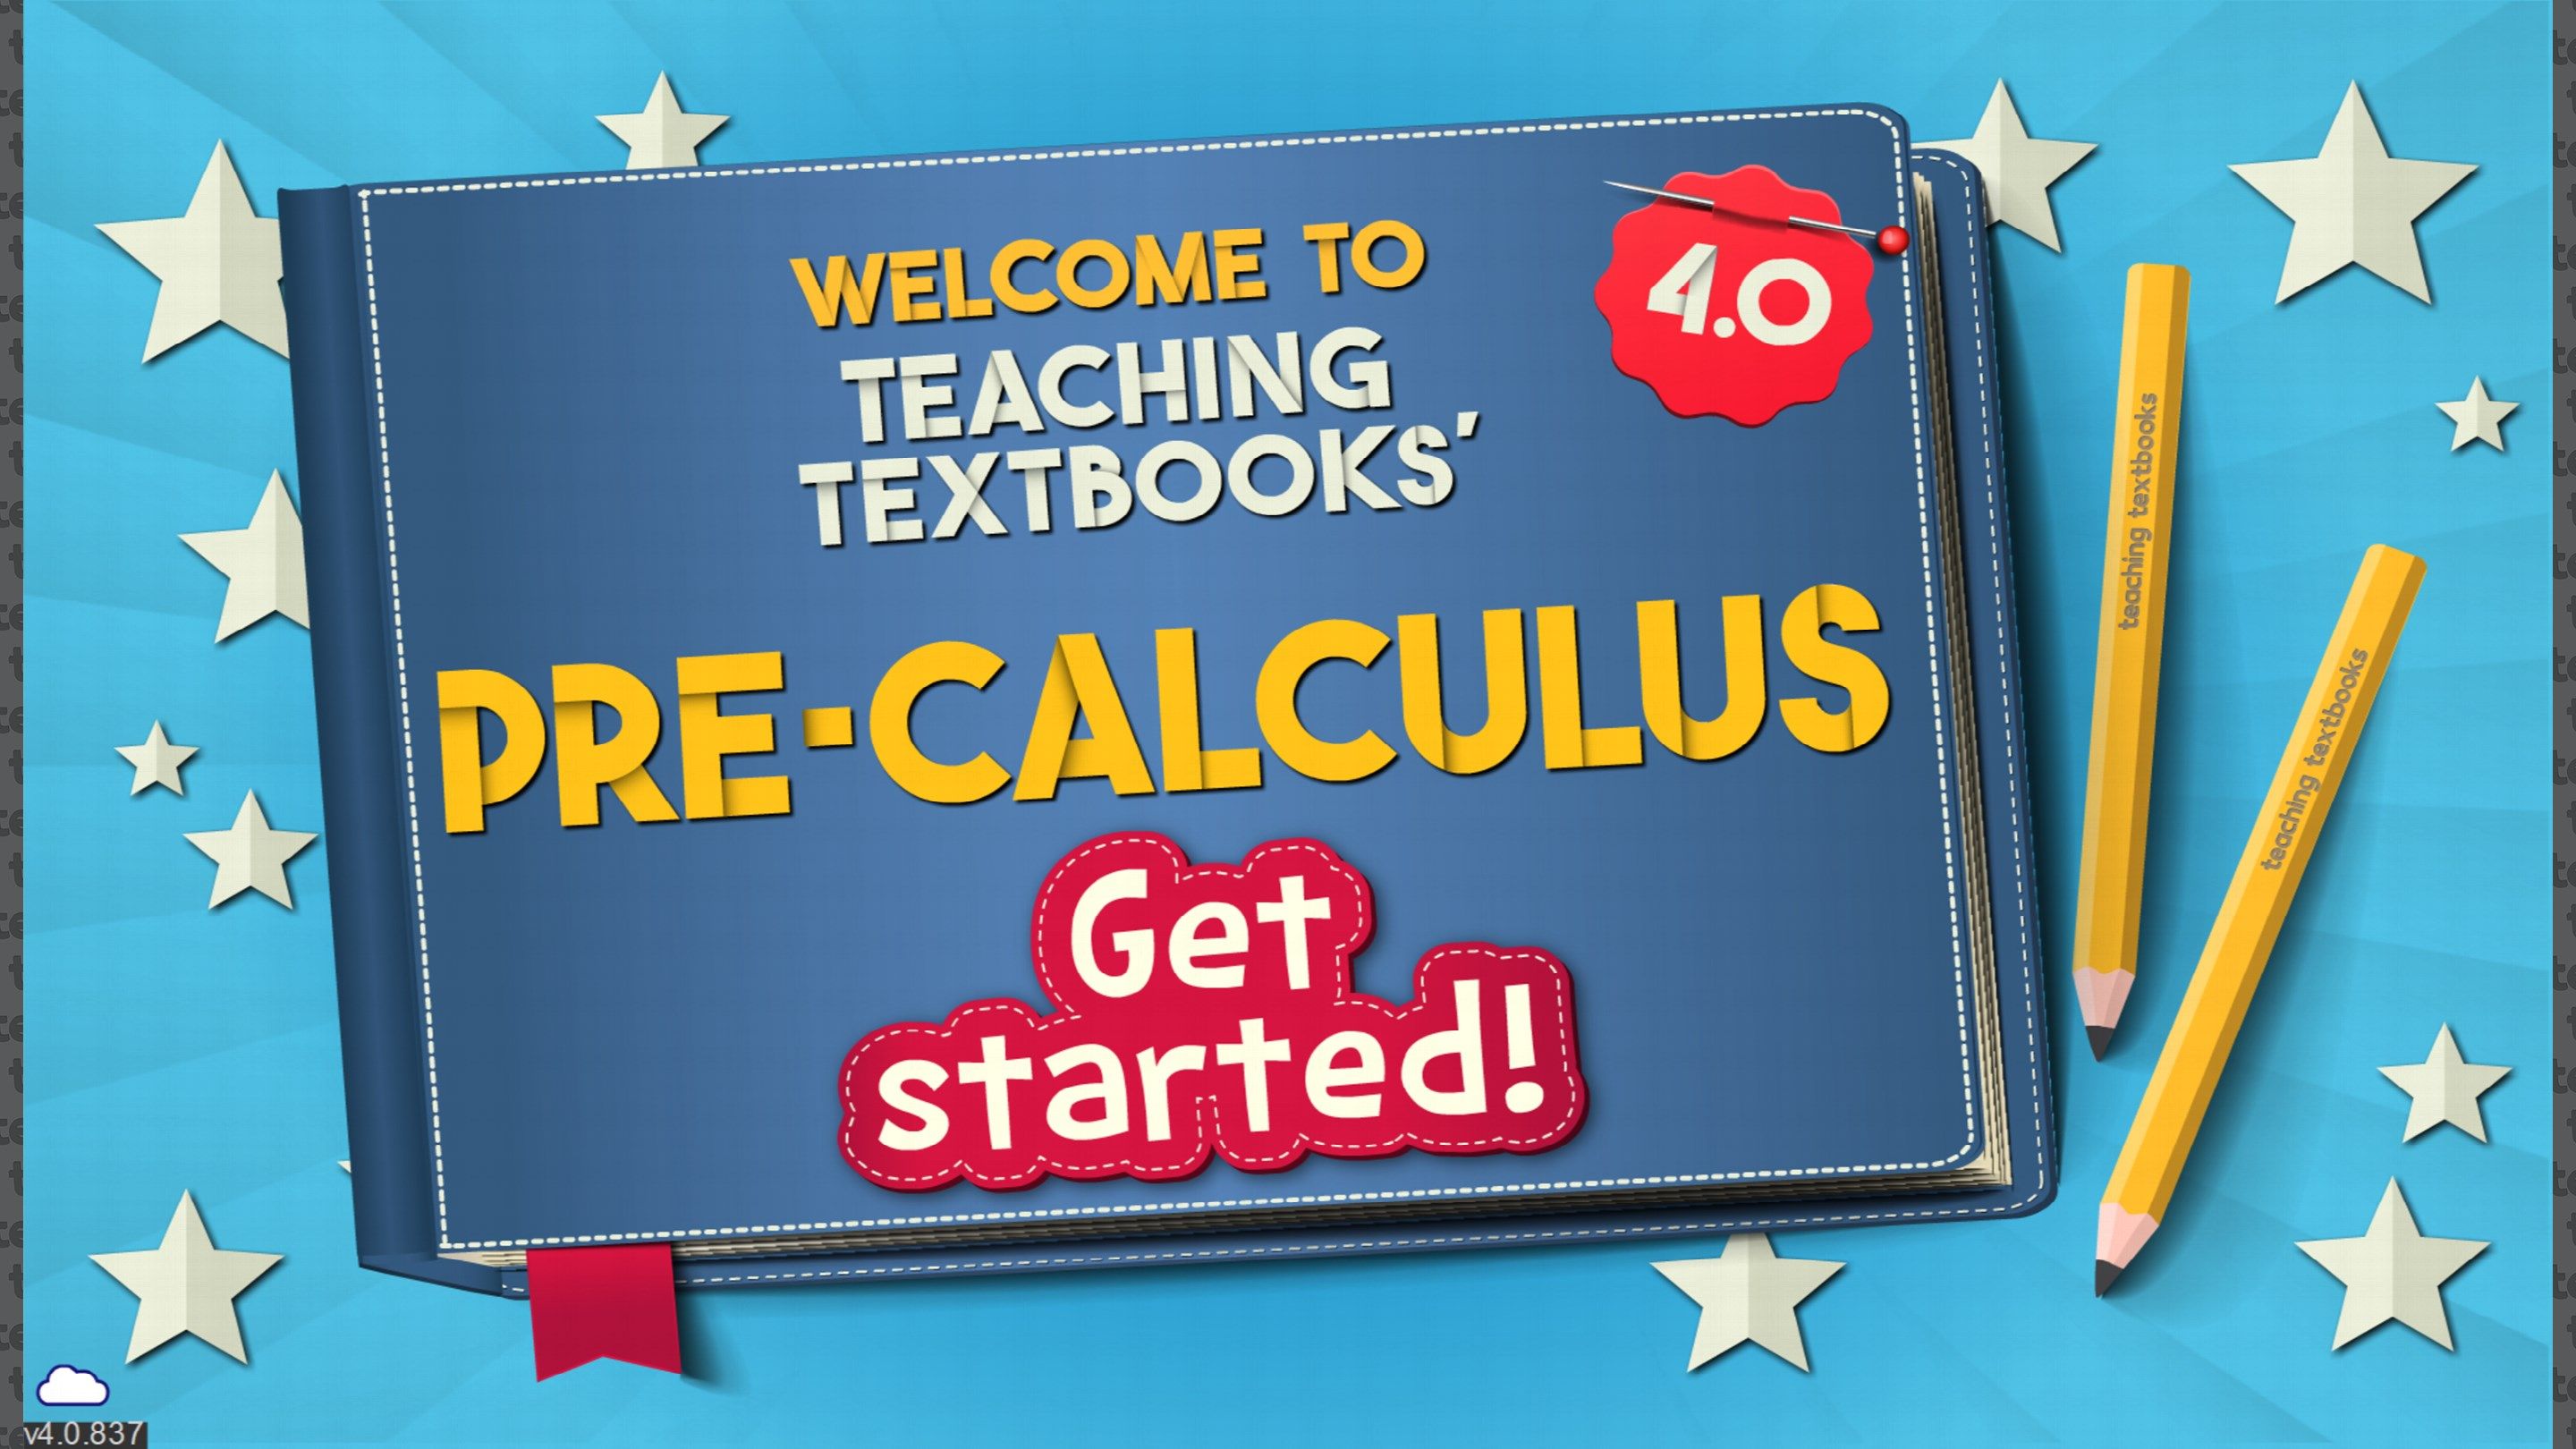 When the app launches, all you have to do to get started is log in with your Teaching Textbooks parent account, and it will connect to your Pre-Calculus enrollment.